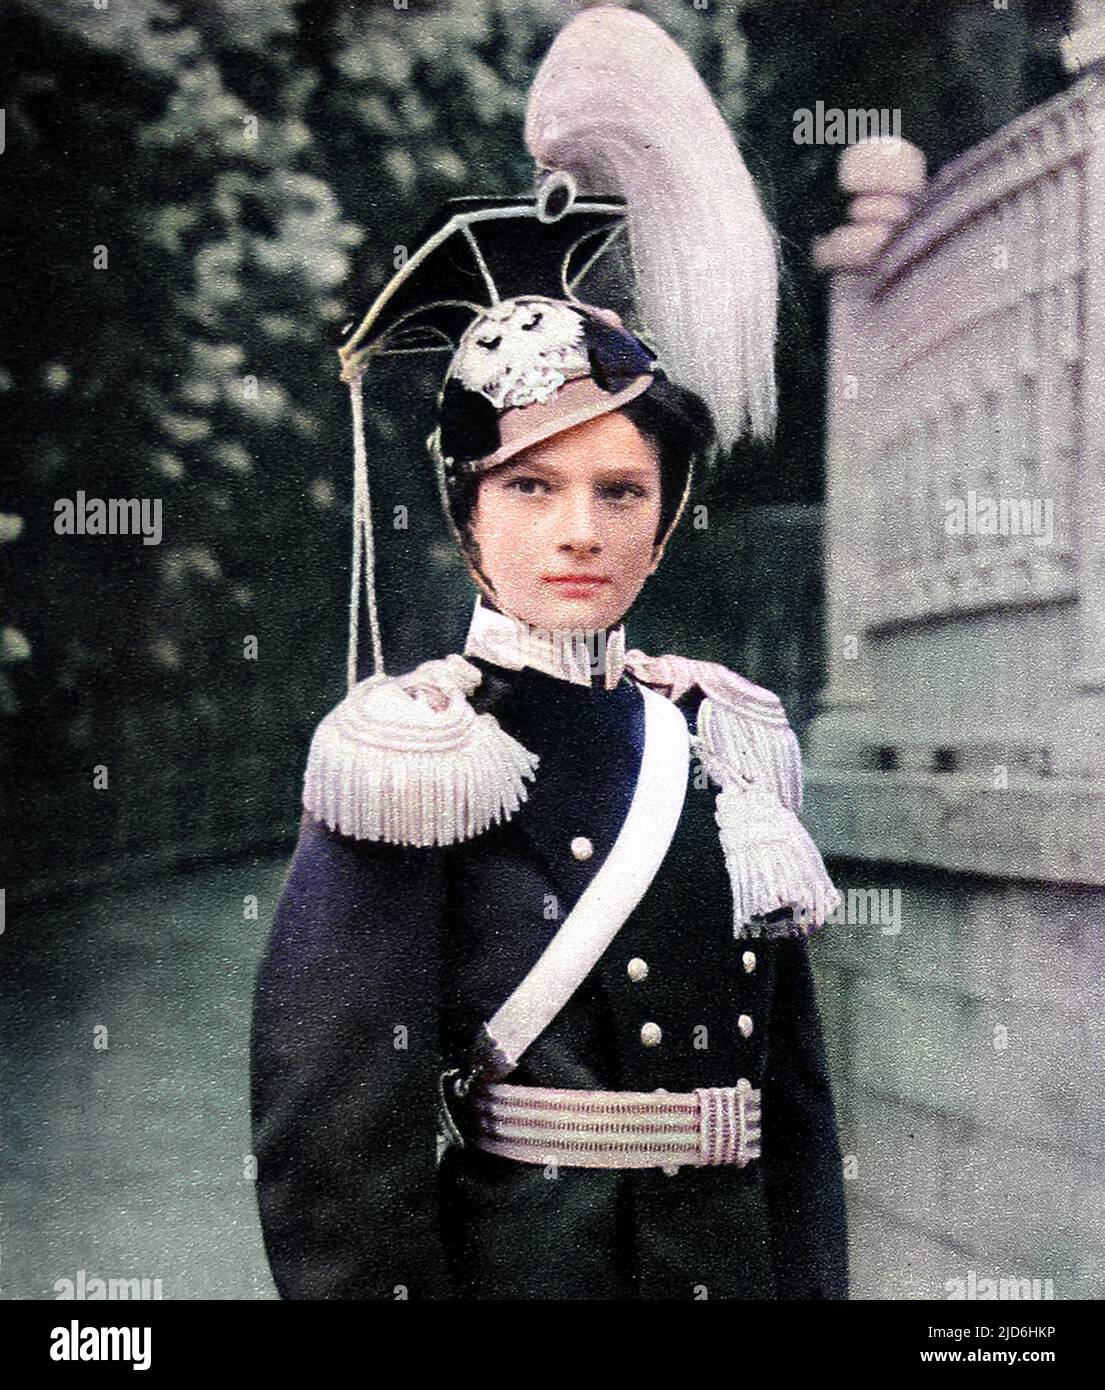 Grand Duchess Tatiana Nikolaevna of Russia (1897 - 1918), second daughter of Tsar Nicholas II and Alexandra Feodorovna wearing the unifom of Colonel-In-Chief of the 8th Regiment of Uhlans of Vosnessensk. Colourised version of: 10220552       Date: 1914 Stock Photo